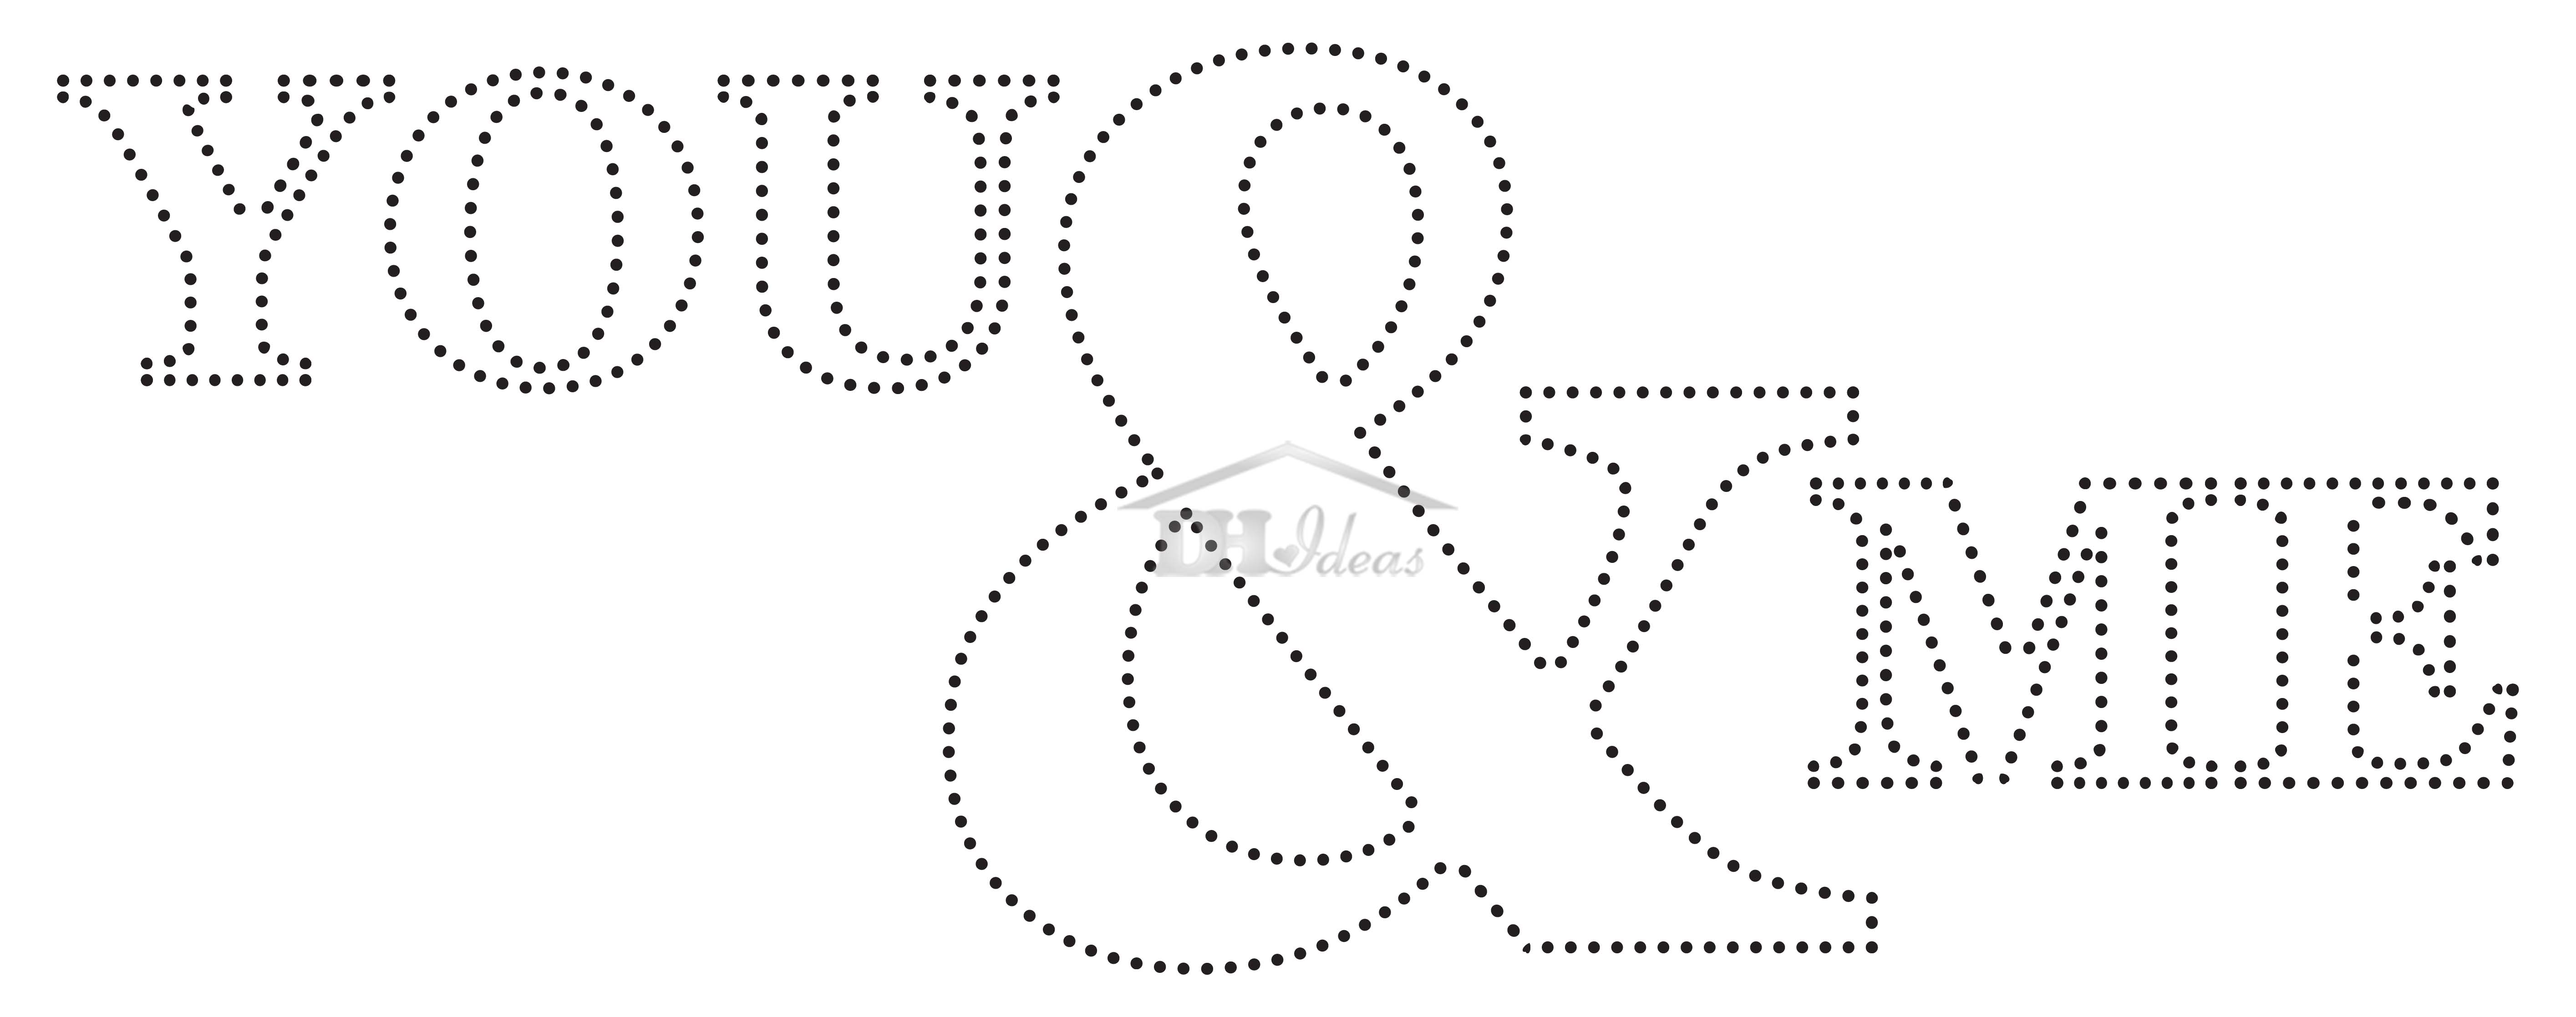 impeccable-free-printable-string-art-patterns-tristan-website